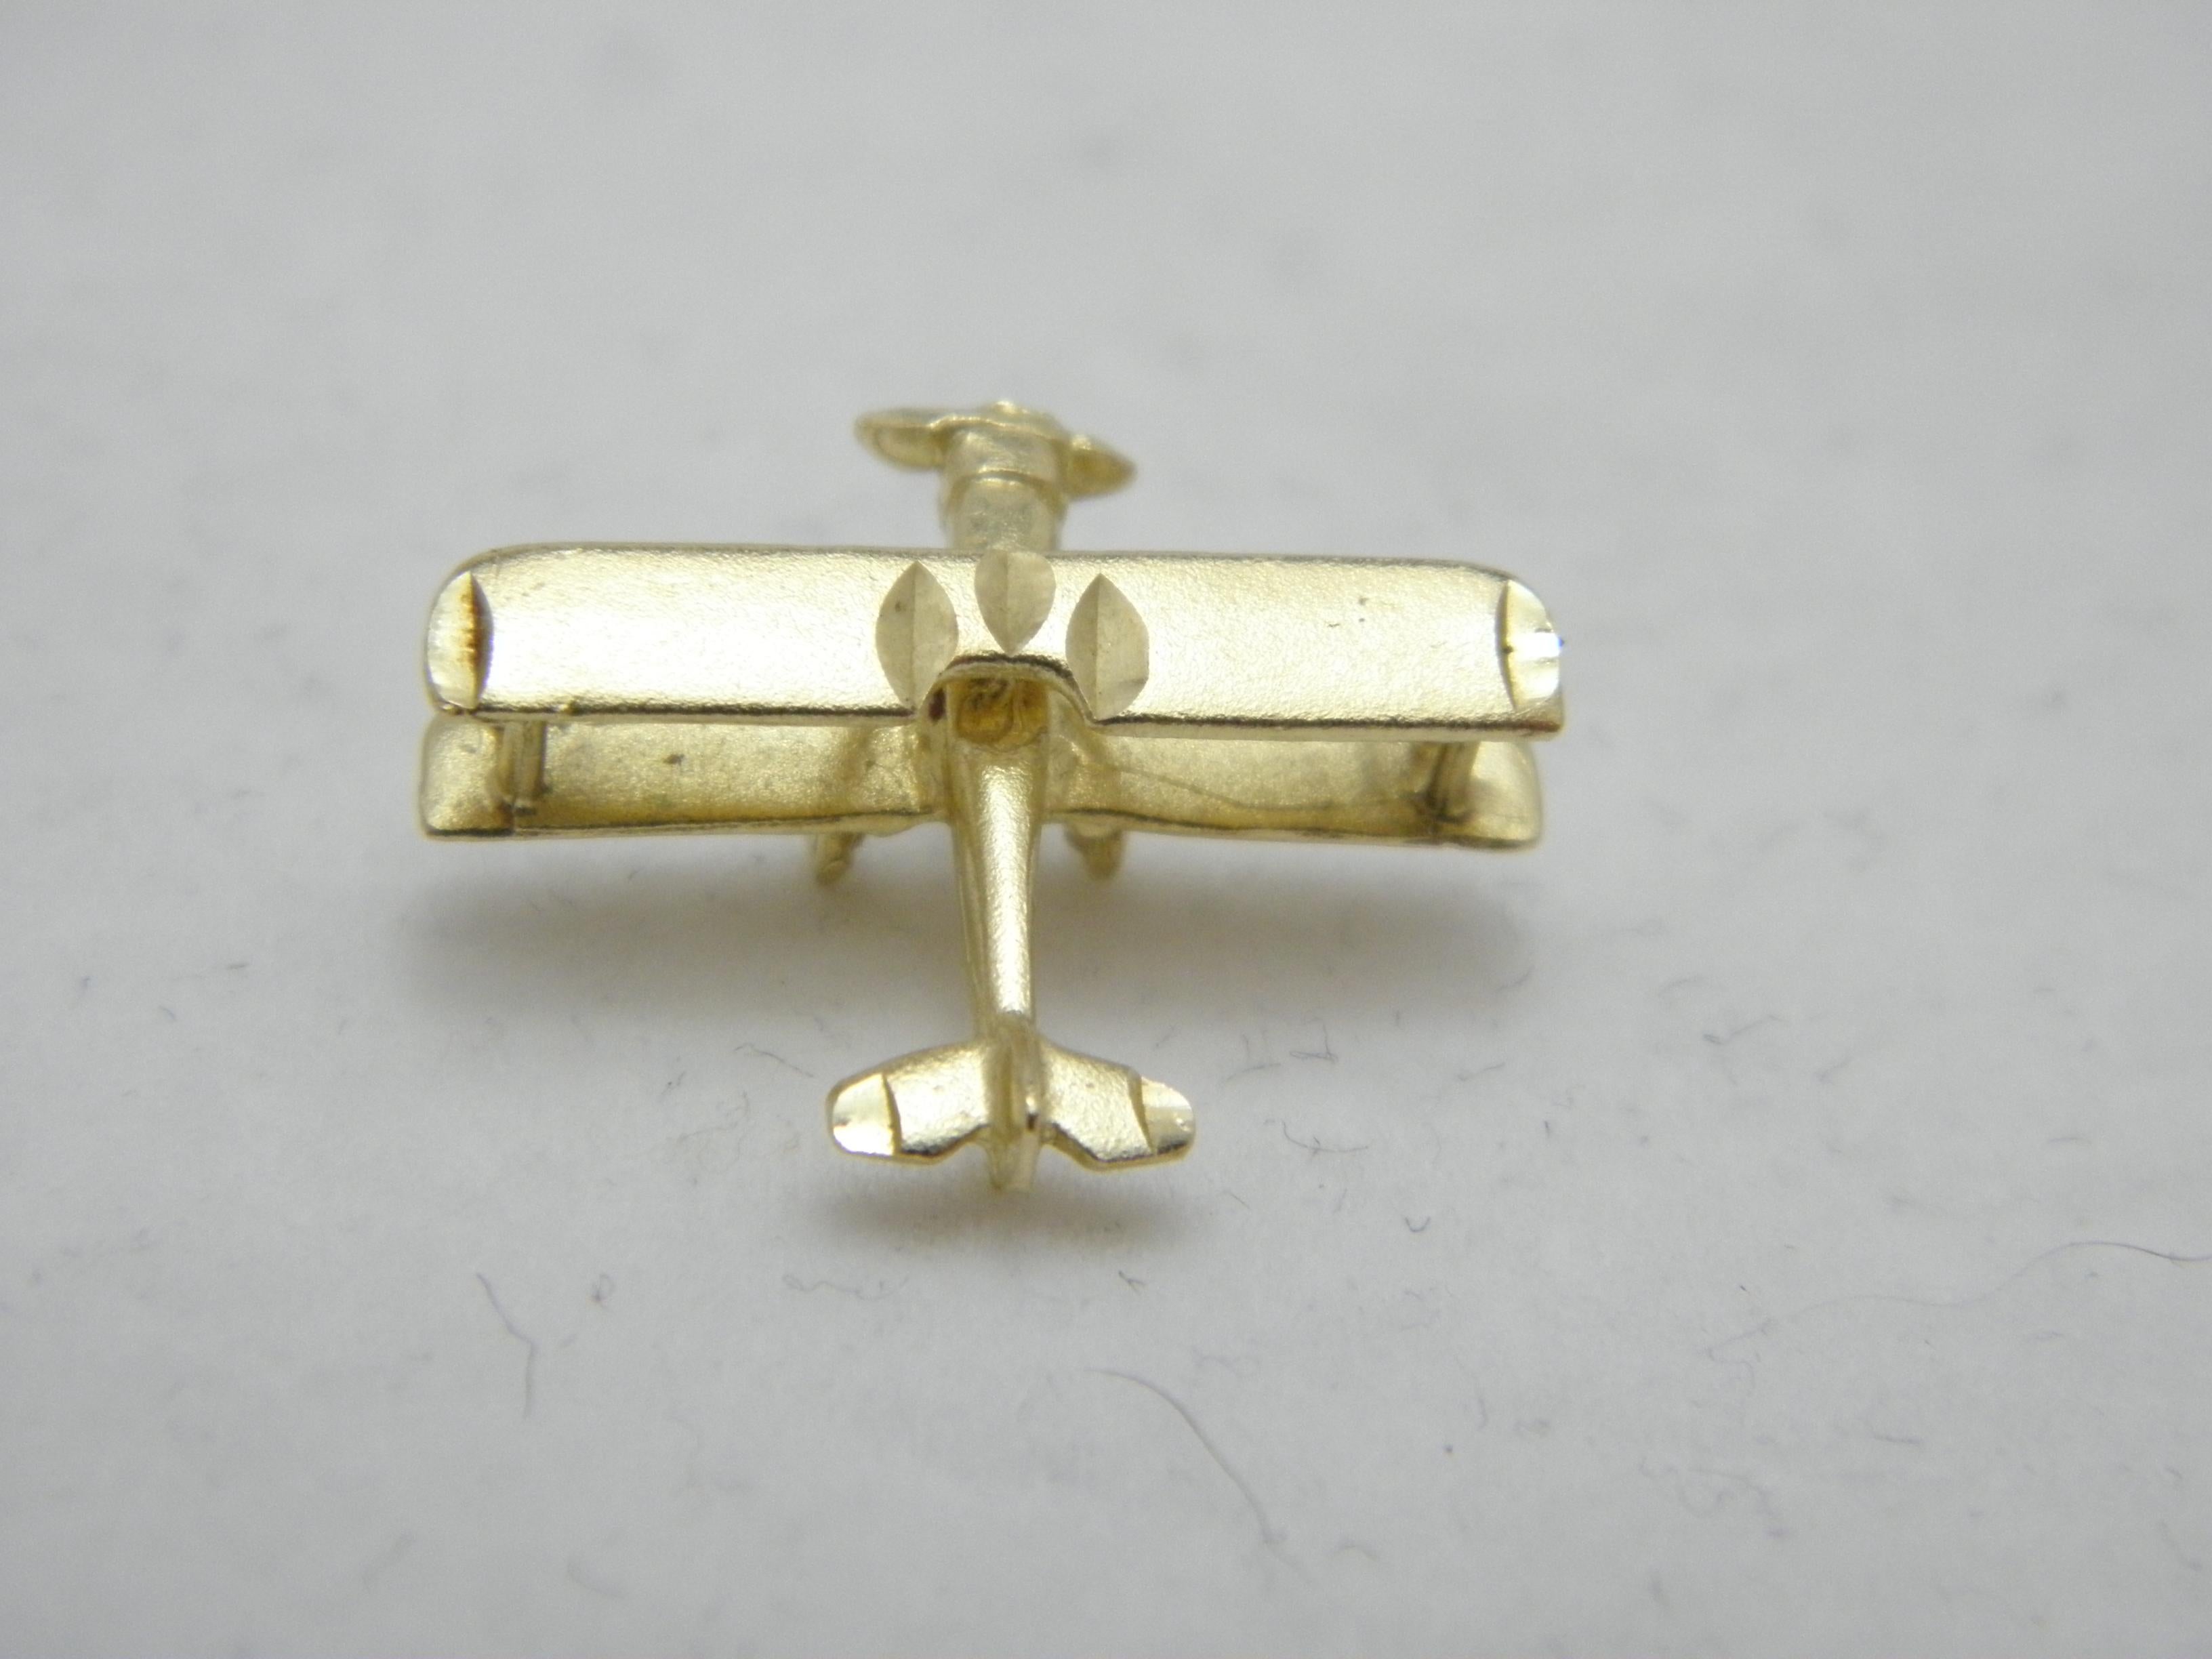 Vintage 14ct Gold Biplane Aeroplane Model Charm Fob c1970s 585 Purity Heavy For Sale 1